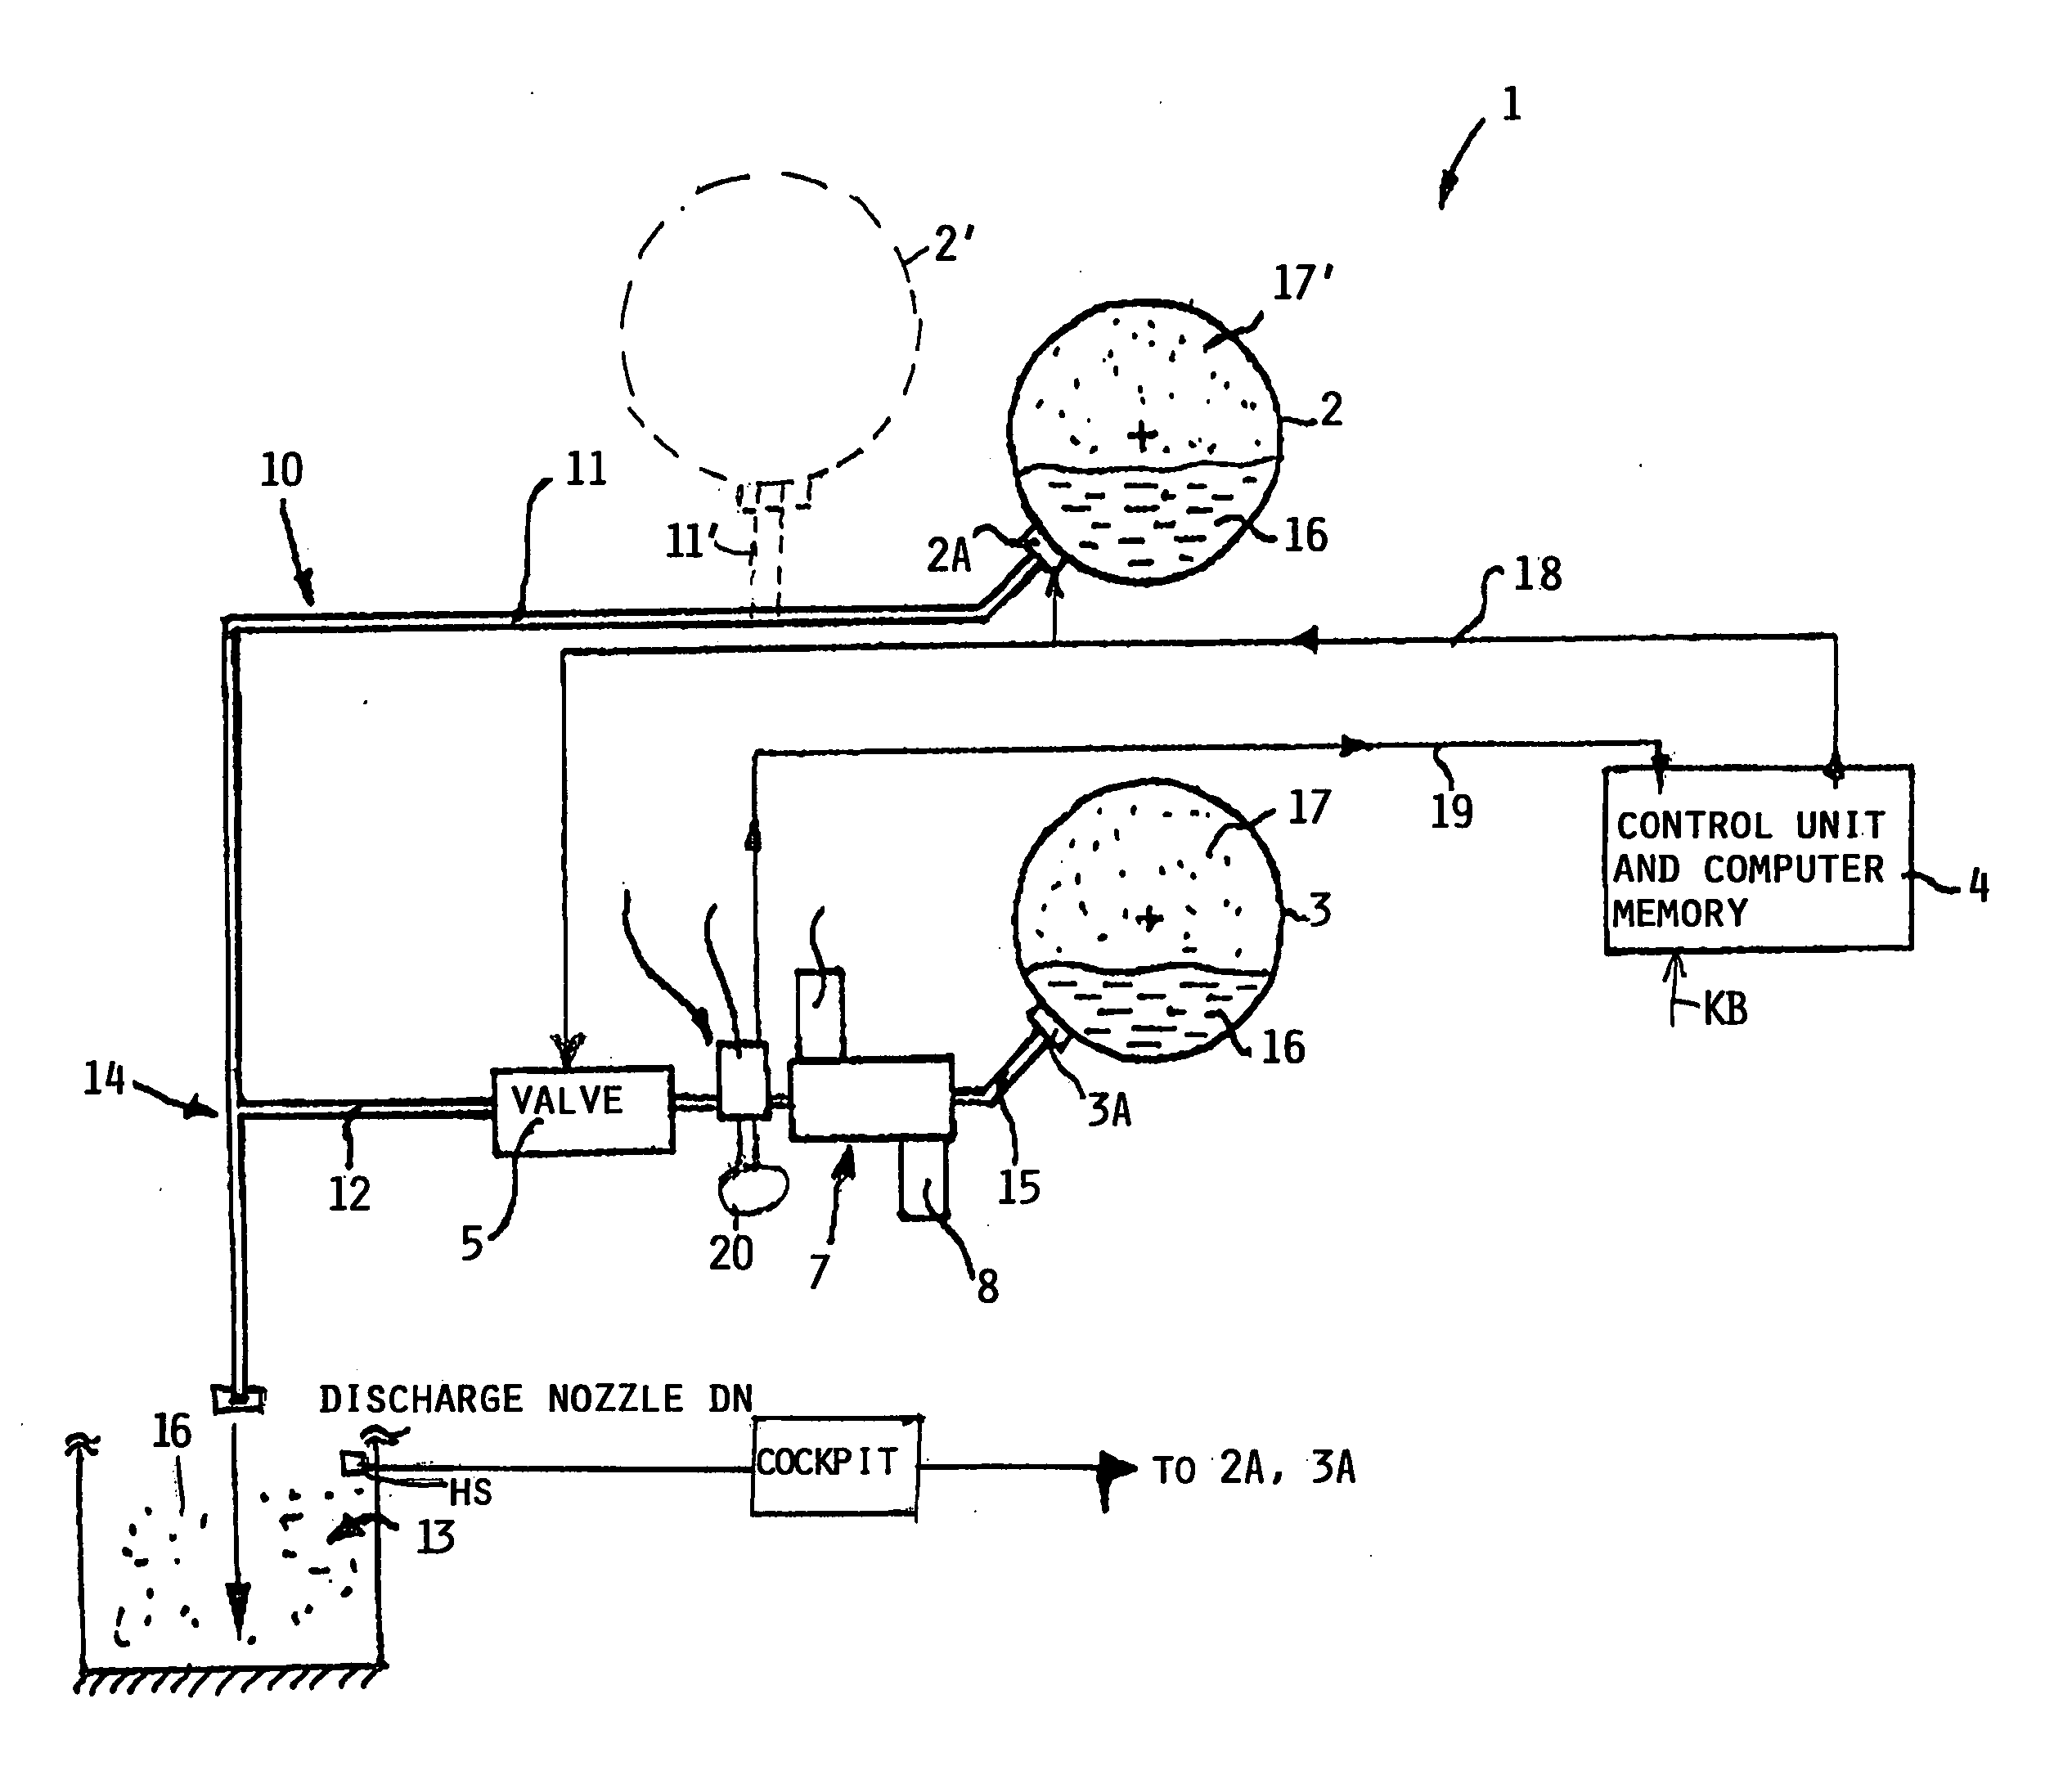 Method and apparatus for extinguishing a fire in an enclosed space